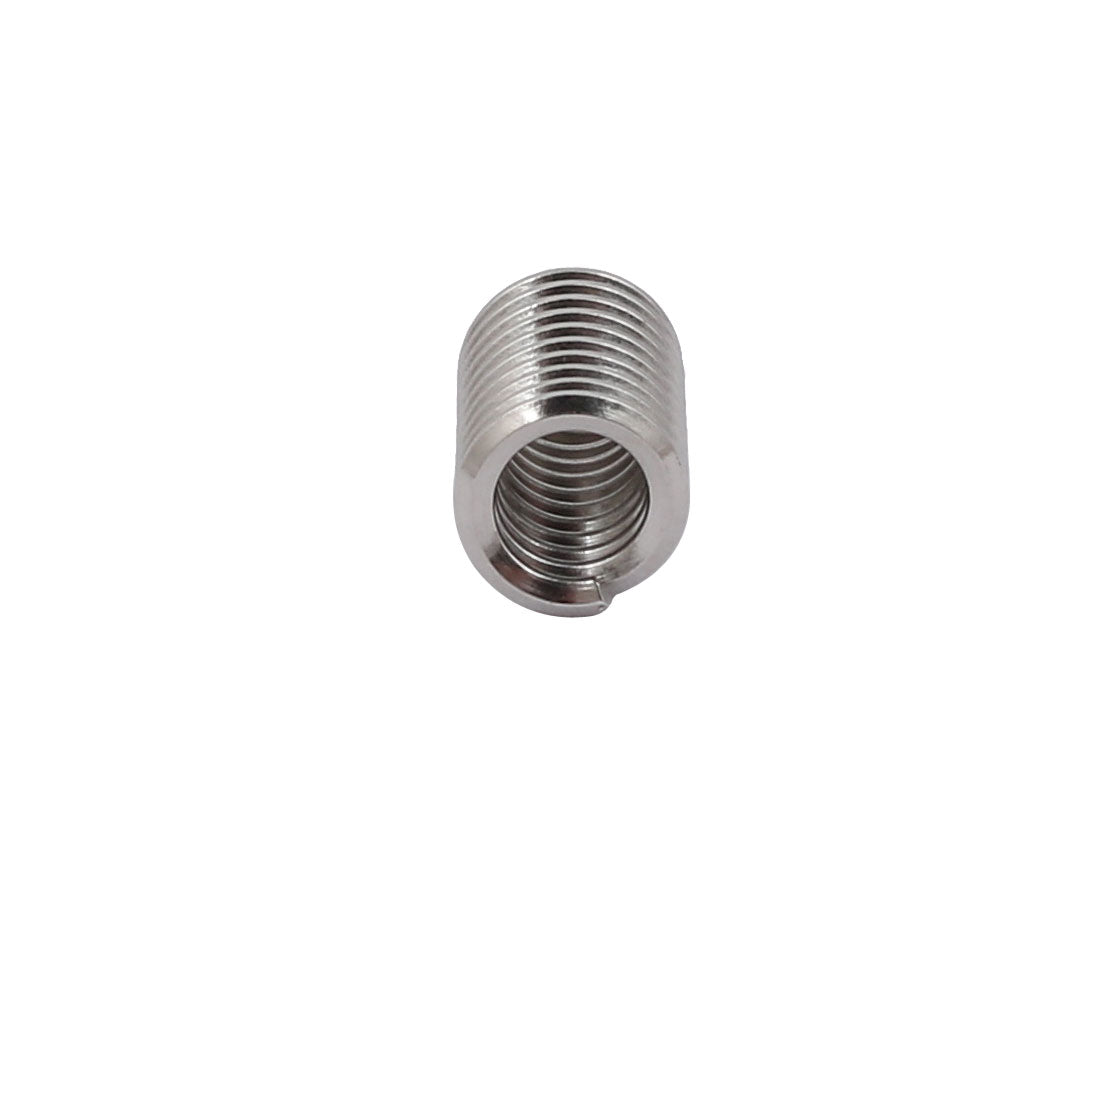 uxcell Uxcell #6-32 x 3D (0.414") 304 Stainless Steel Helical Coil Wire Thread Insert 25pcs